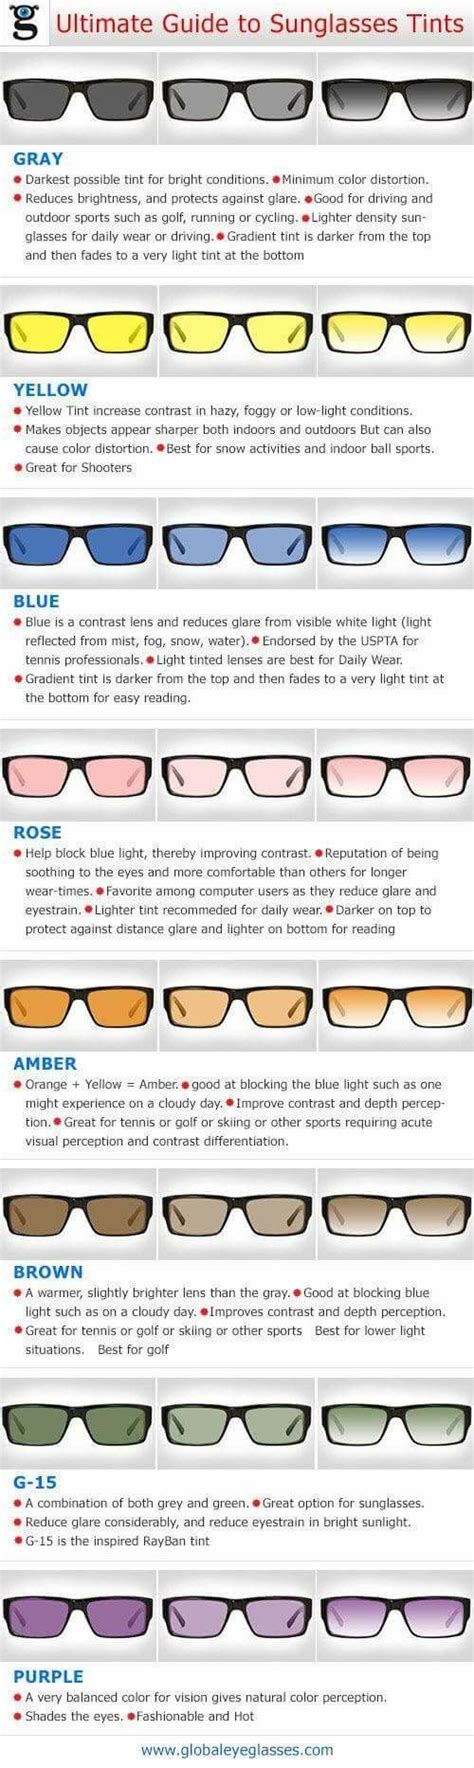 ultimate guide to sunglass tint buy prescription glasses online eye health ray bans